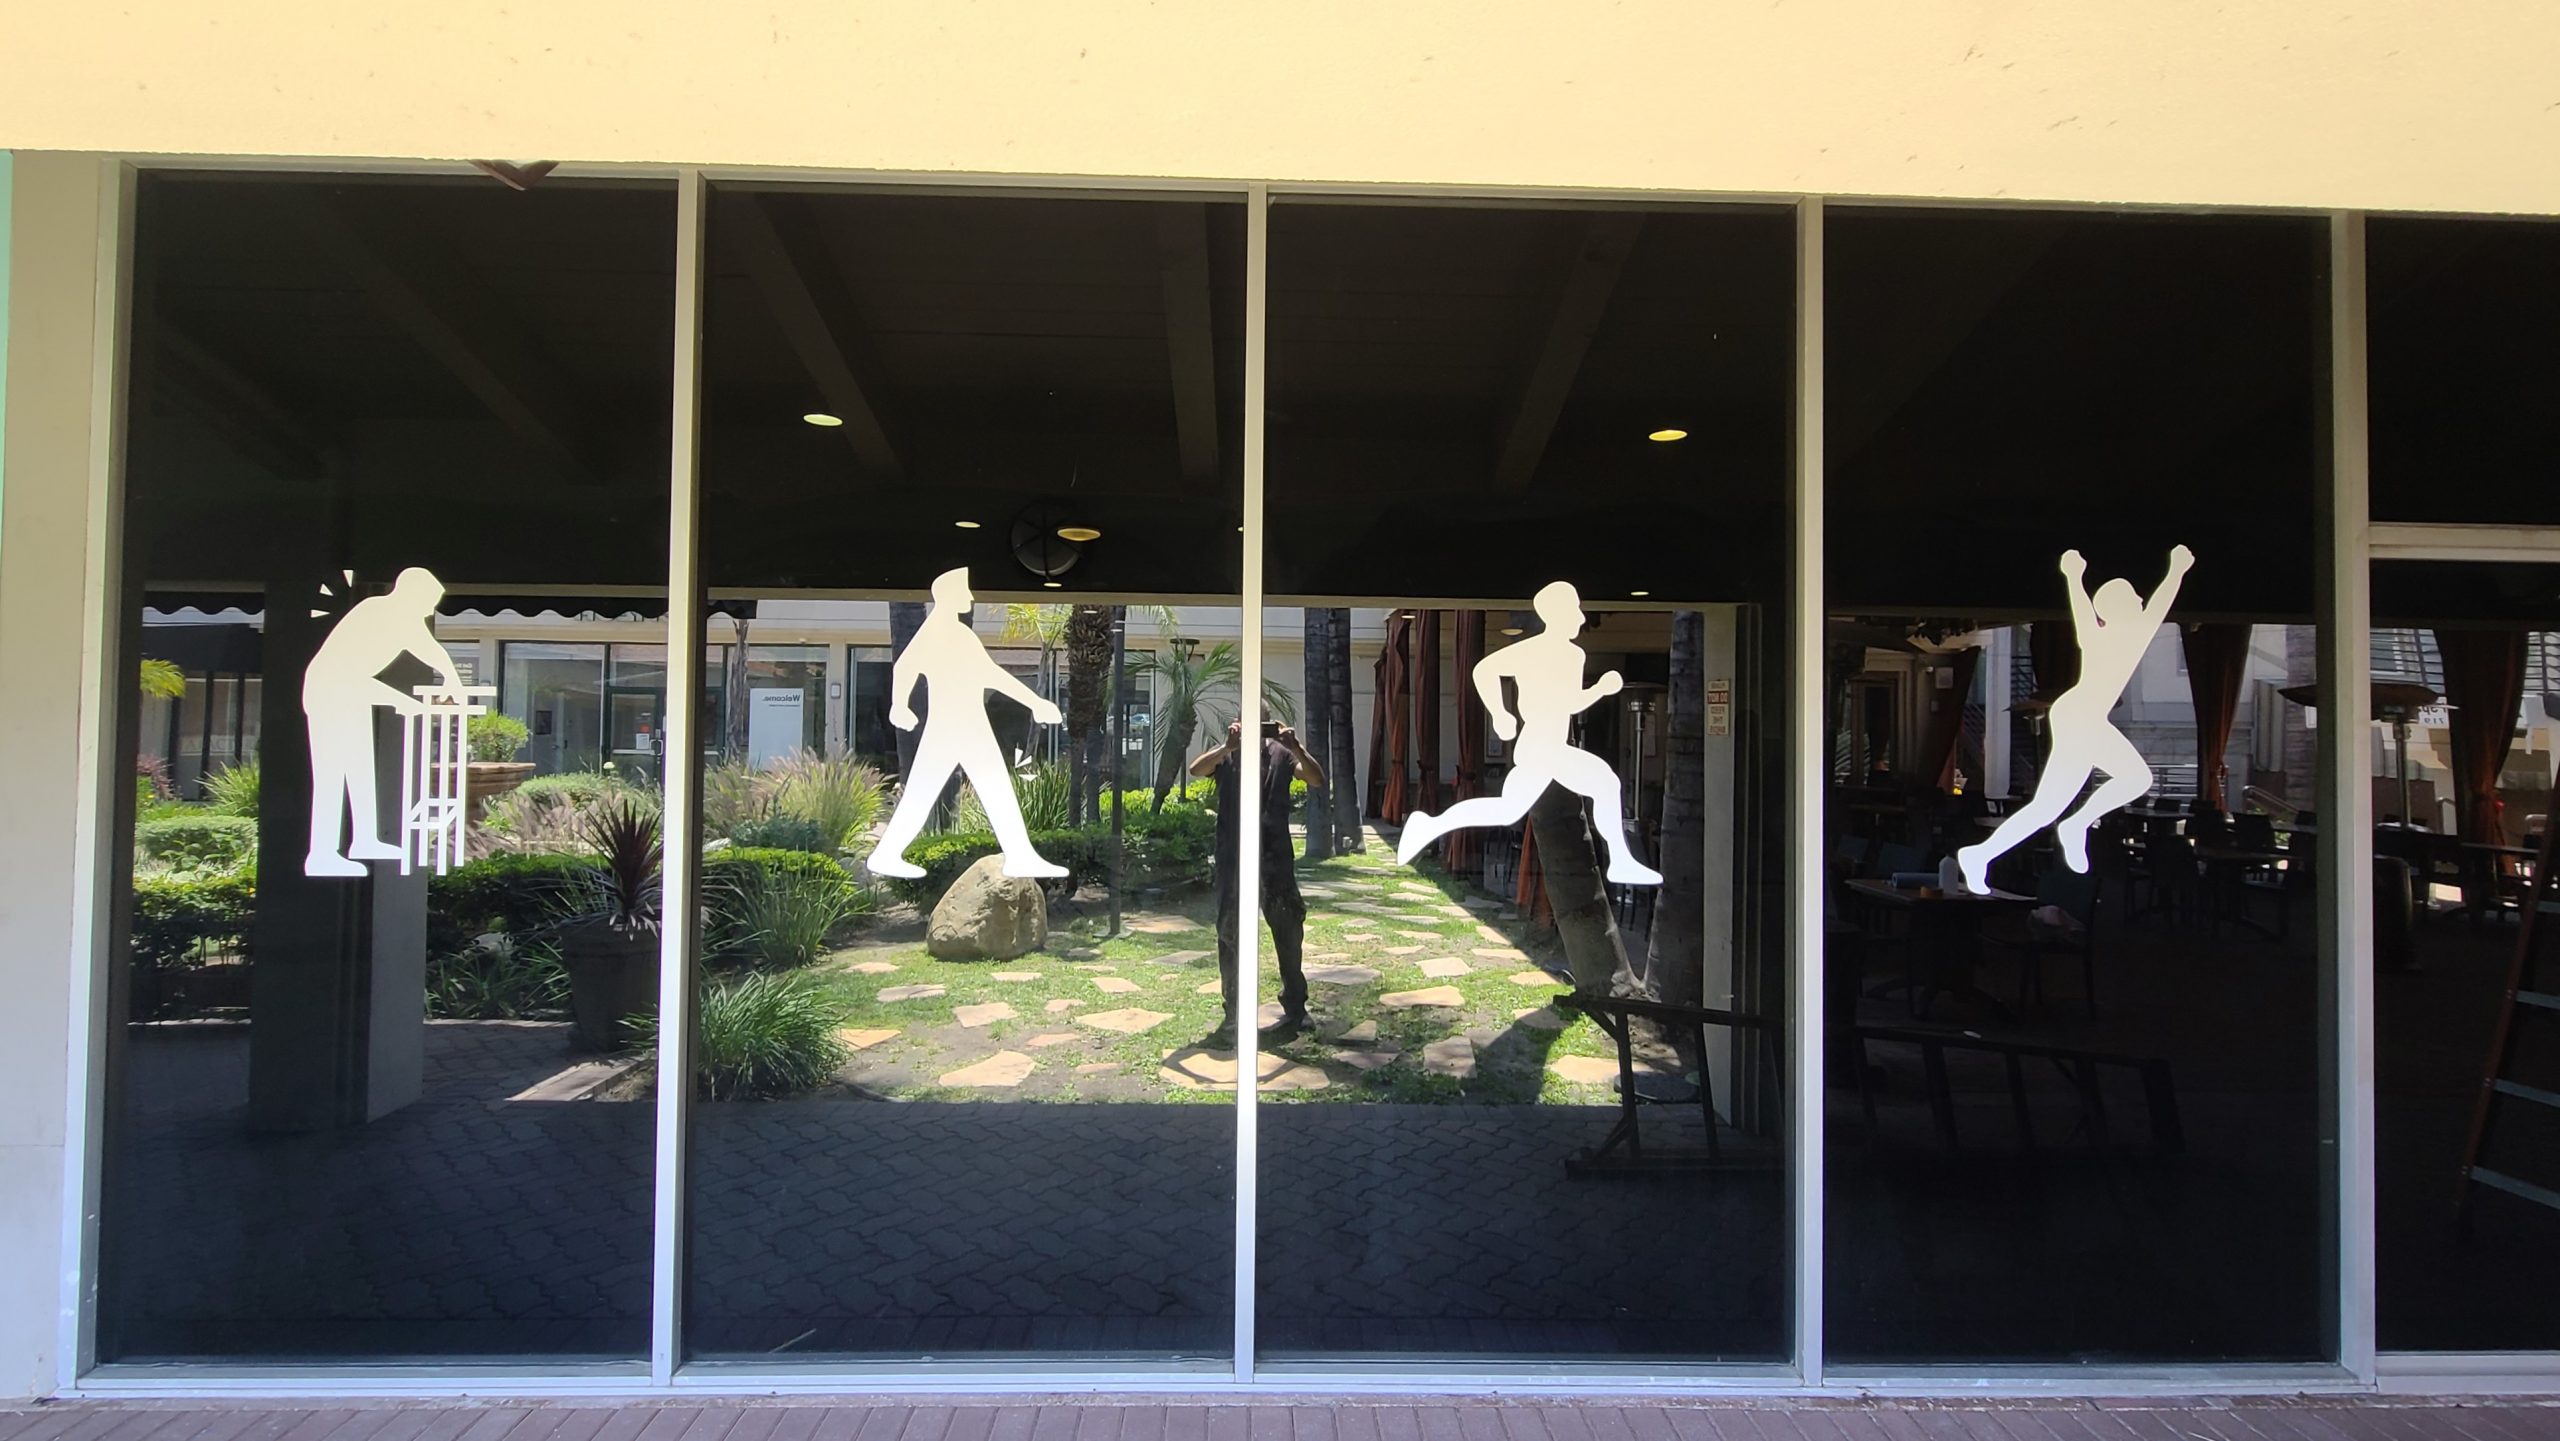 Building window graphics for Back 2 Health in Encino, as part of a comprehensive sign package for the physical therapy center. 